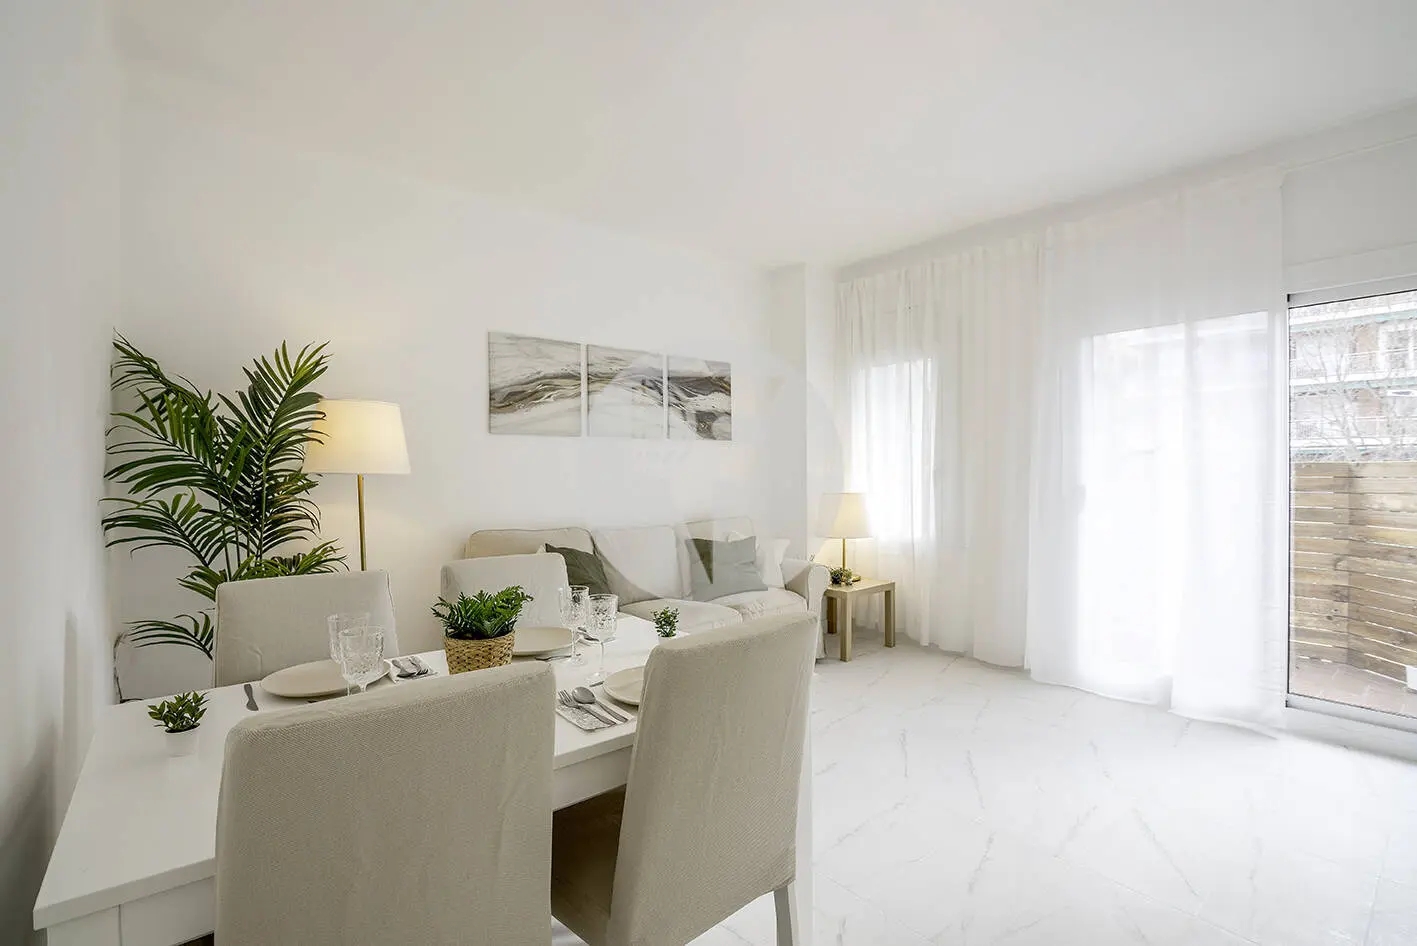 Brand new completely renovated apartment on Aragó street in the heart of El Clot in Barcelona.